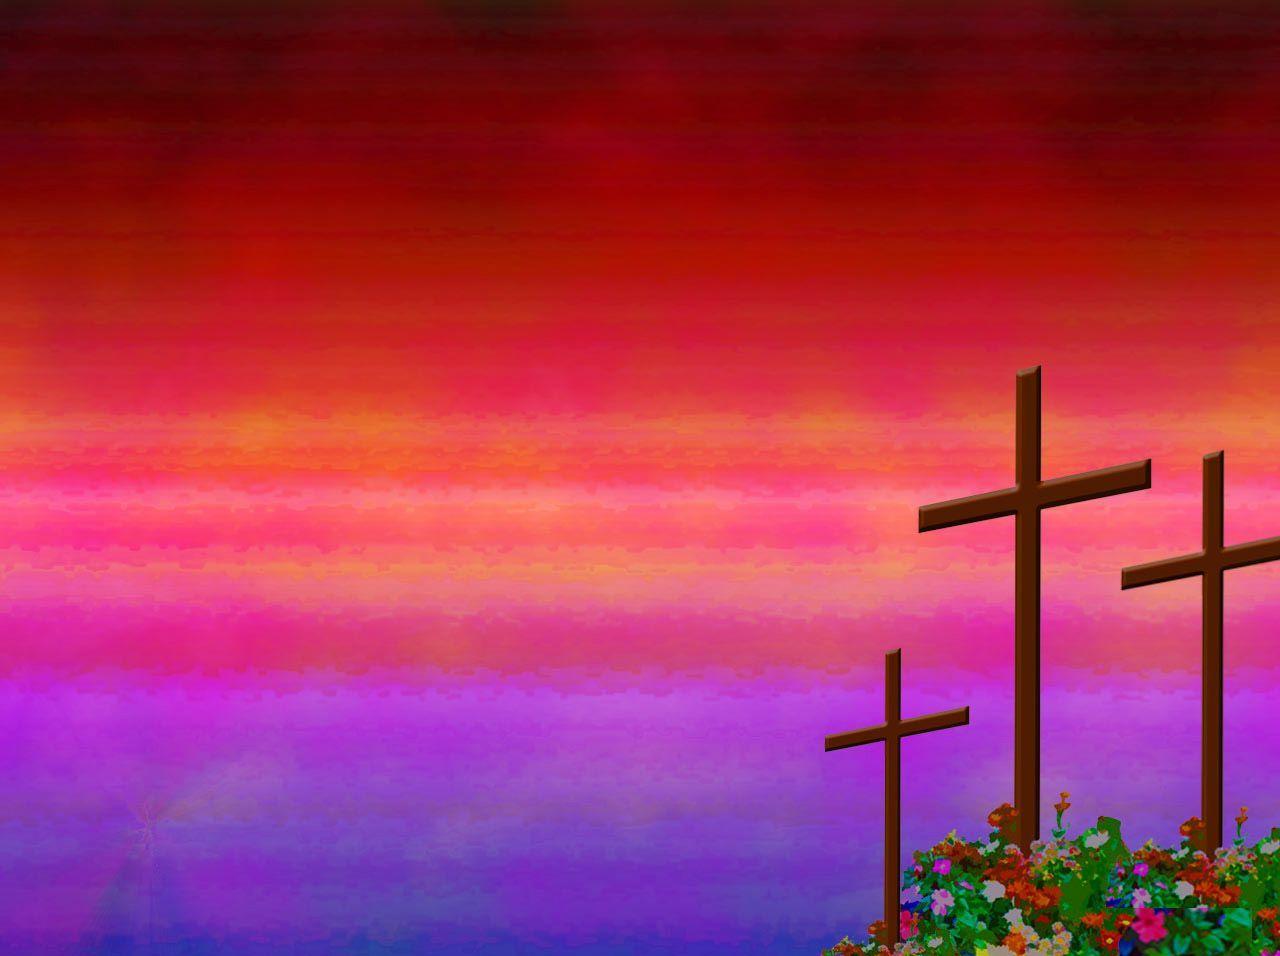 Christian rose garden PowerPoint background. Available in 1280x956